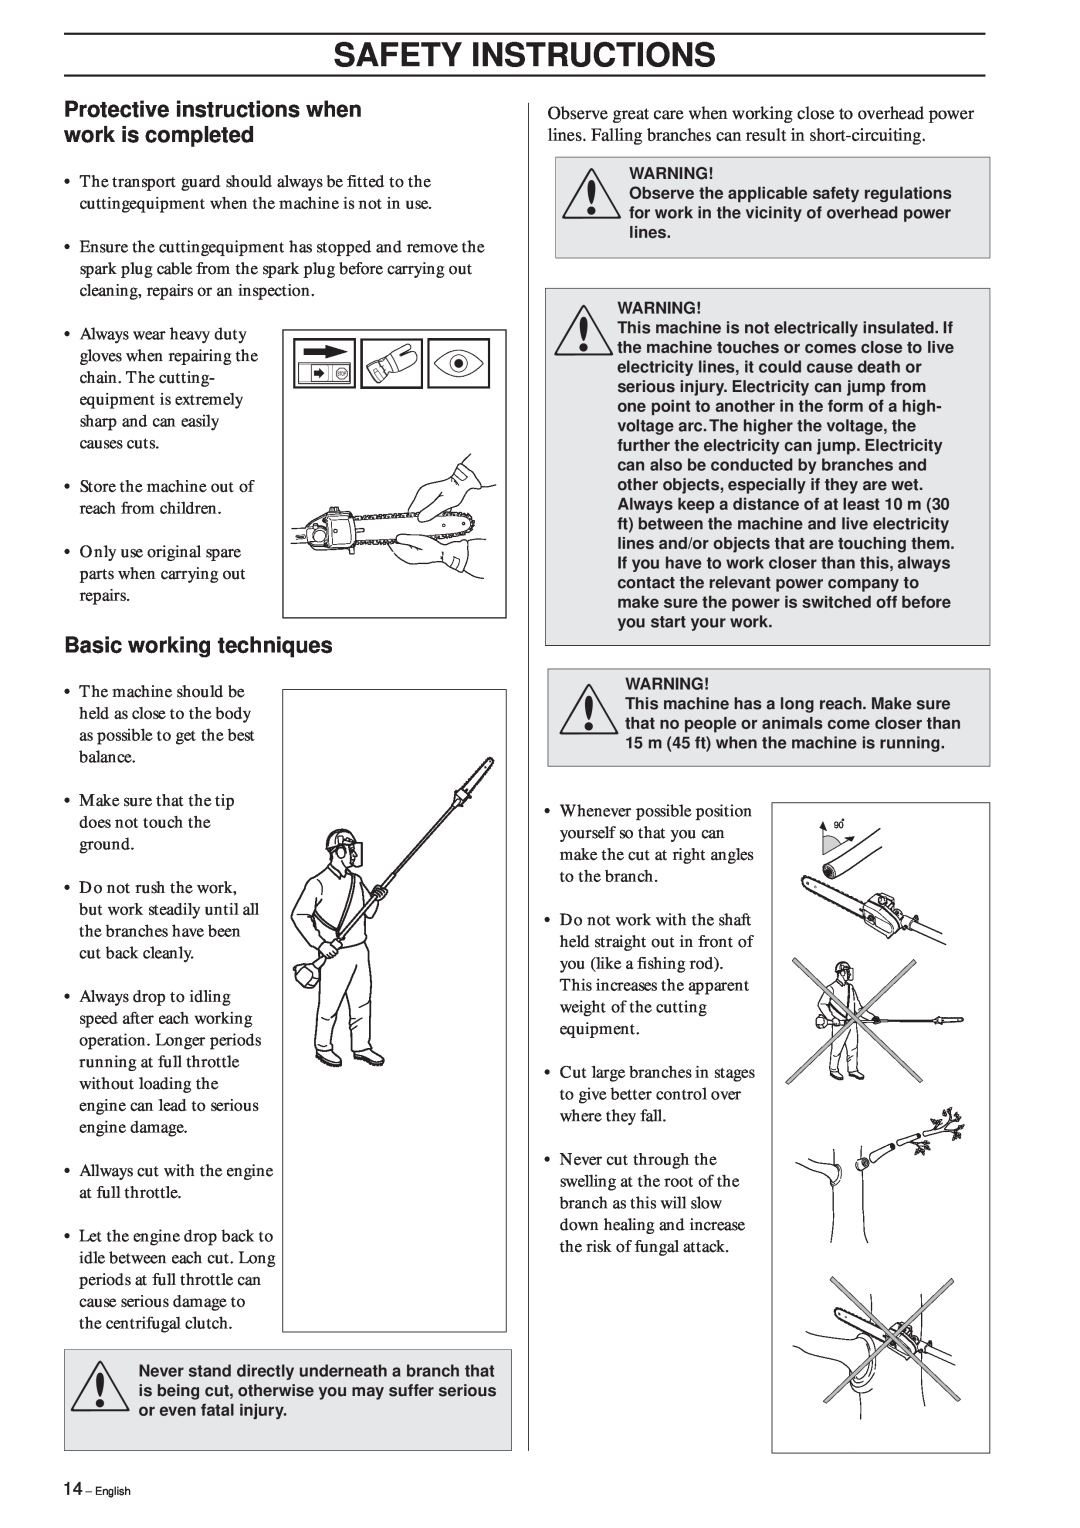 Husqvarna 326P4, 326P5 manual Protective instructions when work is completed, Basic working techniques, Safety Instructions 